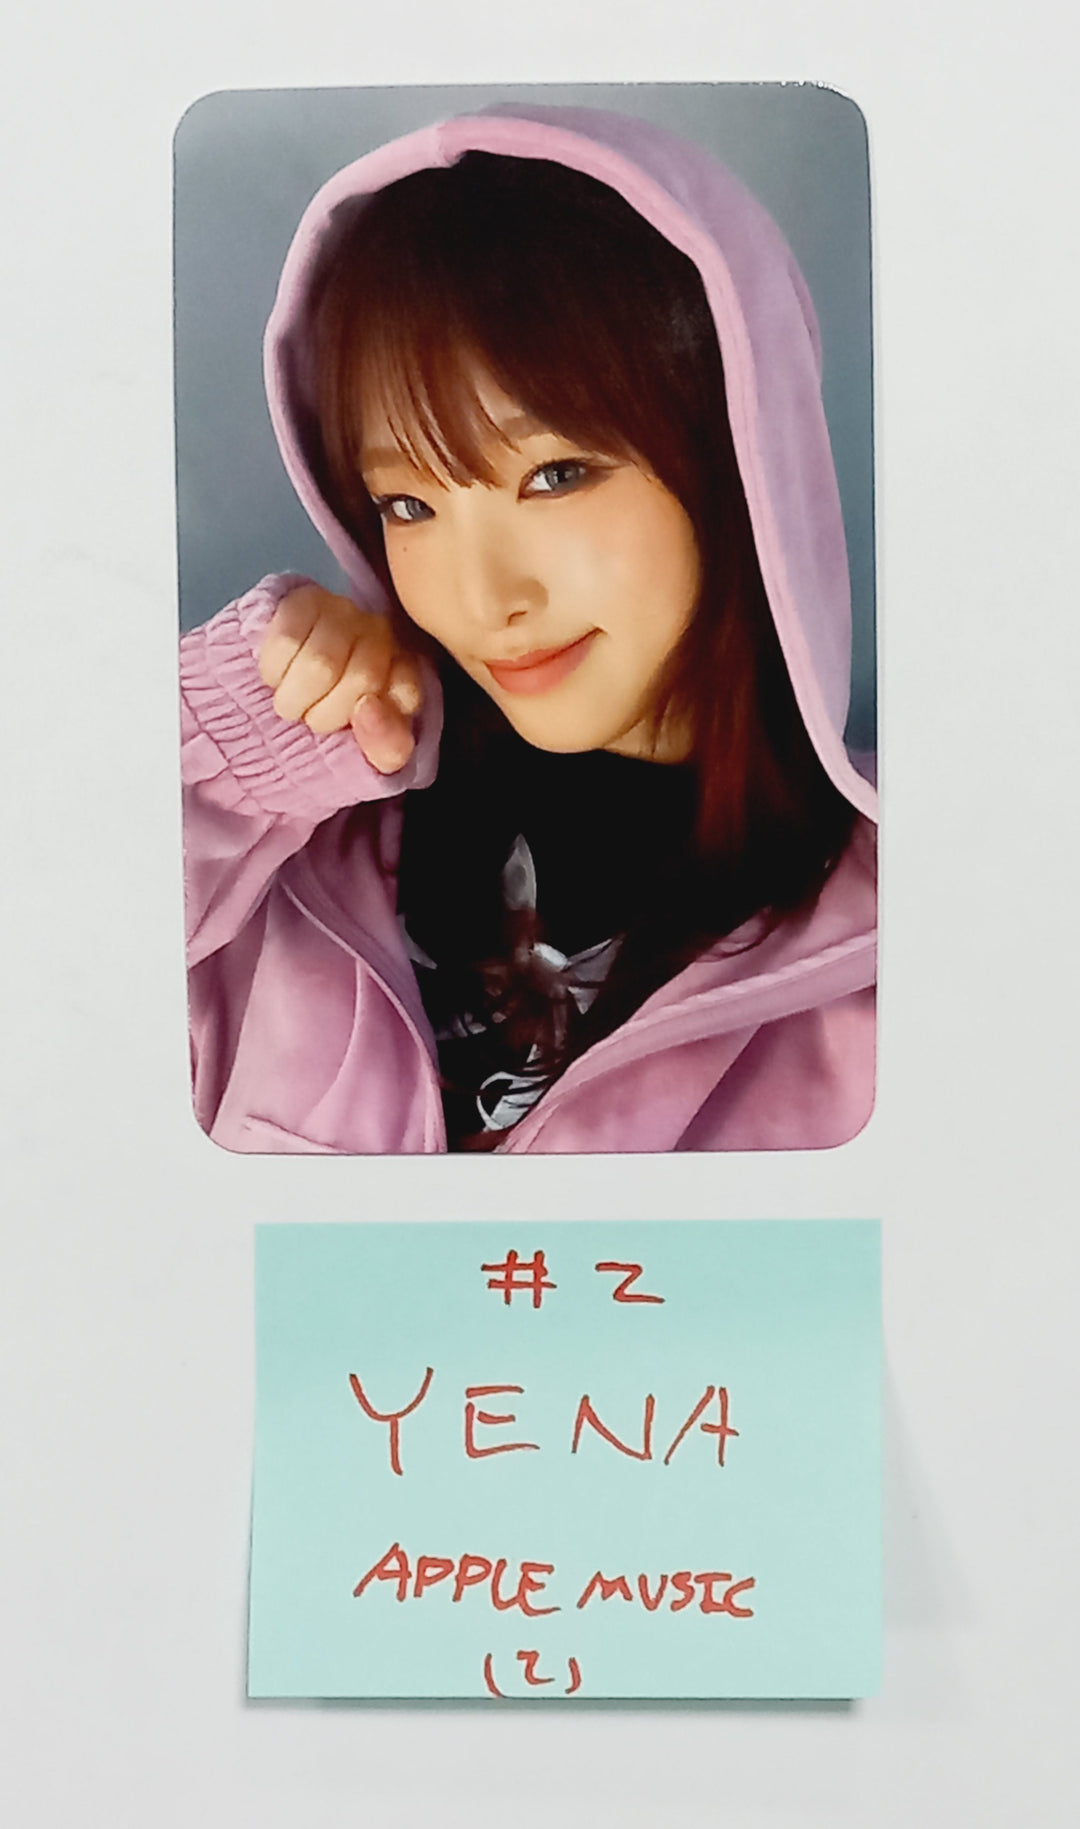 YENA "Good Morning" - Apple Music Fansign Event Photocard Round 3 [24.3.25]